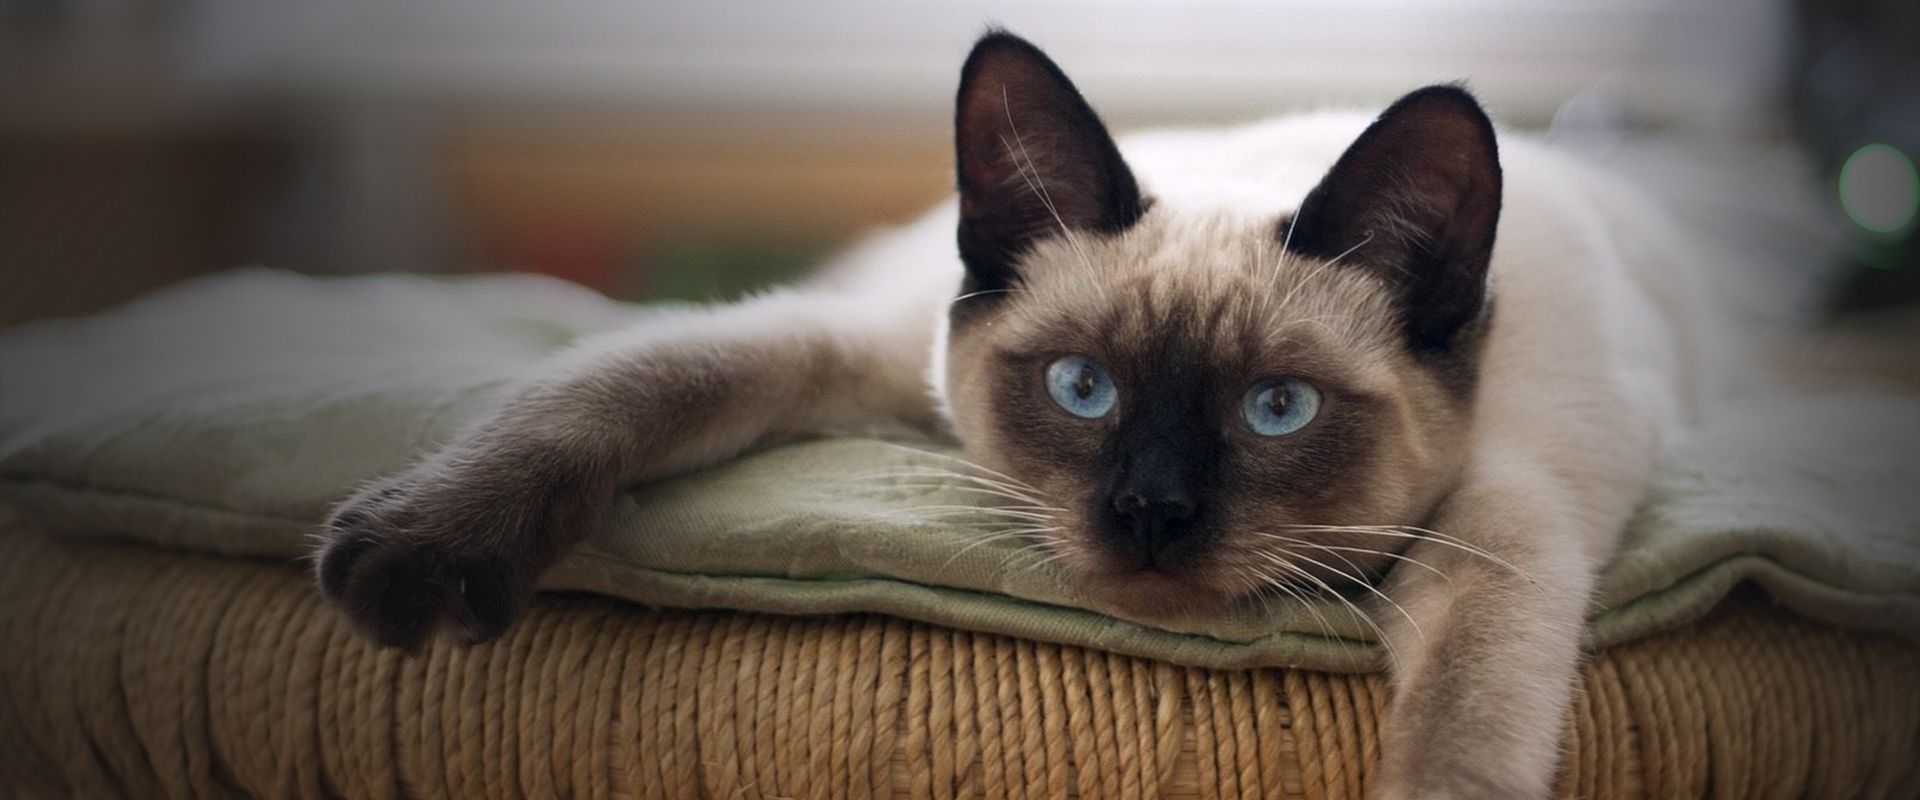 siamese cat lies on a green blanket